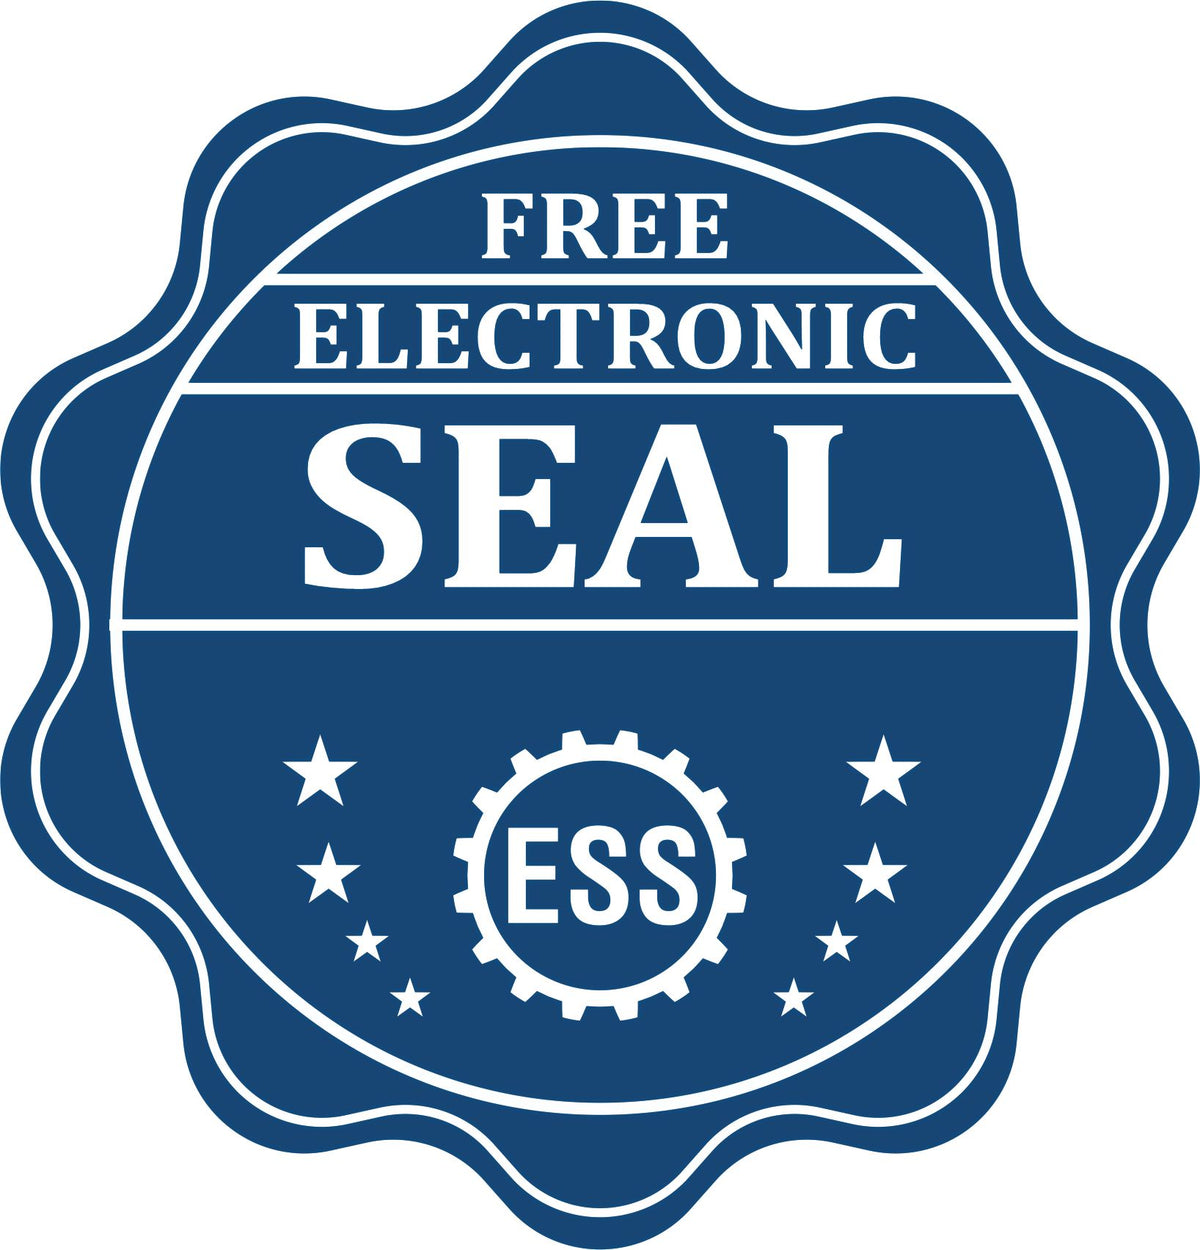 A badge showing a free electronic seal for the Gift Louisiana Geologist Seal with stars and the ESS gear on the emblem.